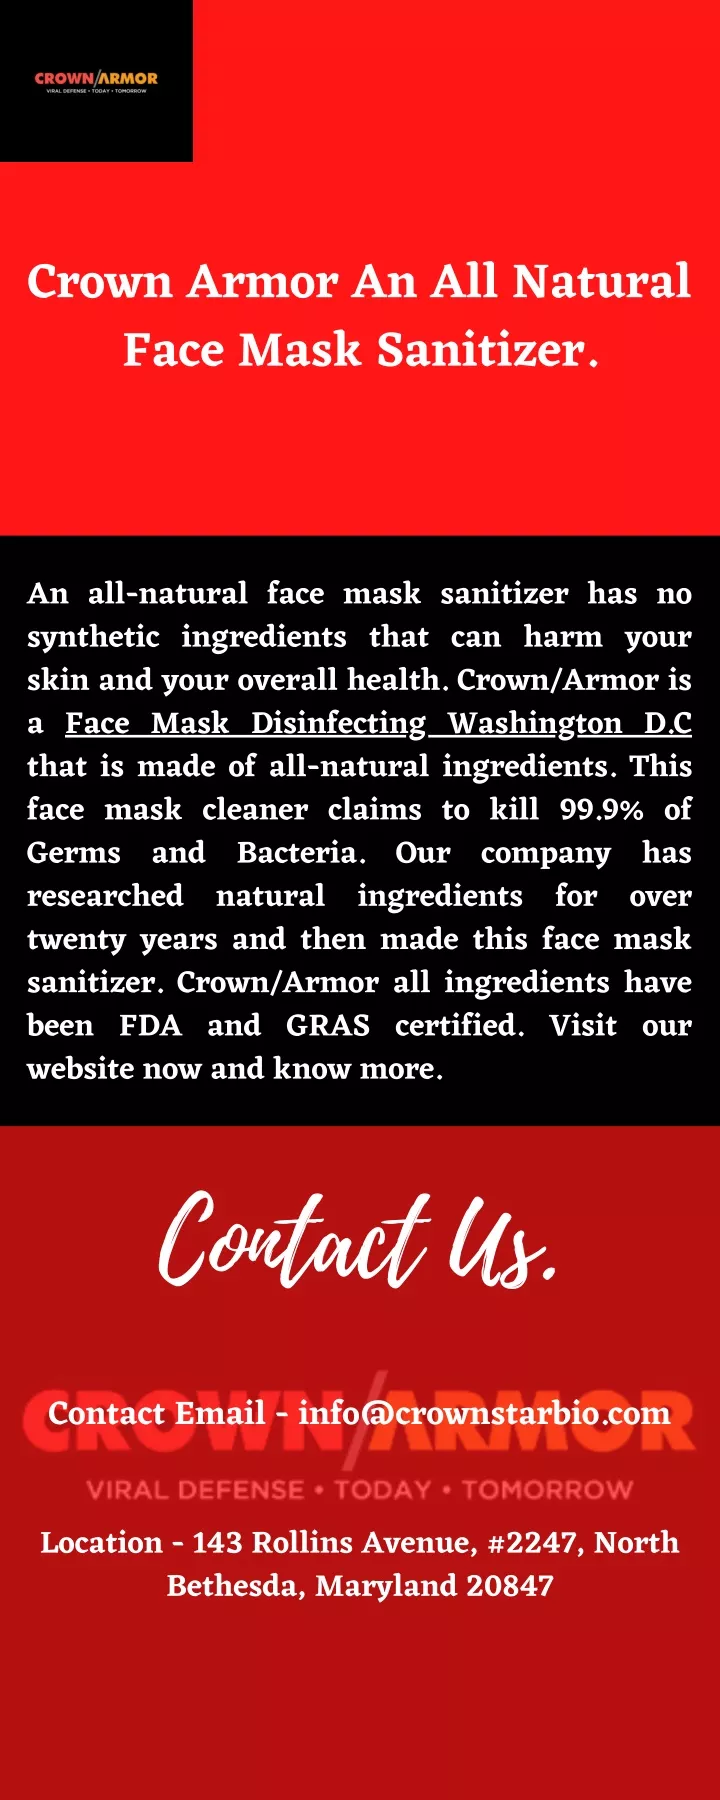 crown armor an all natural face mask sanitizer